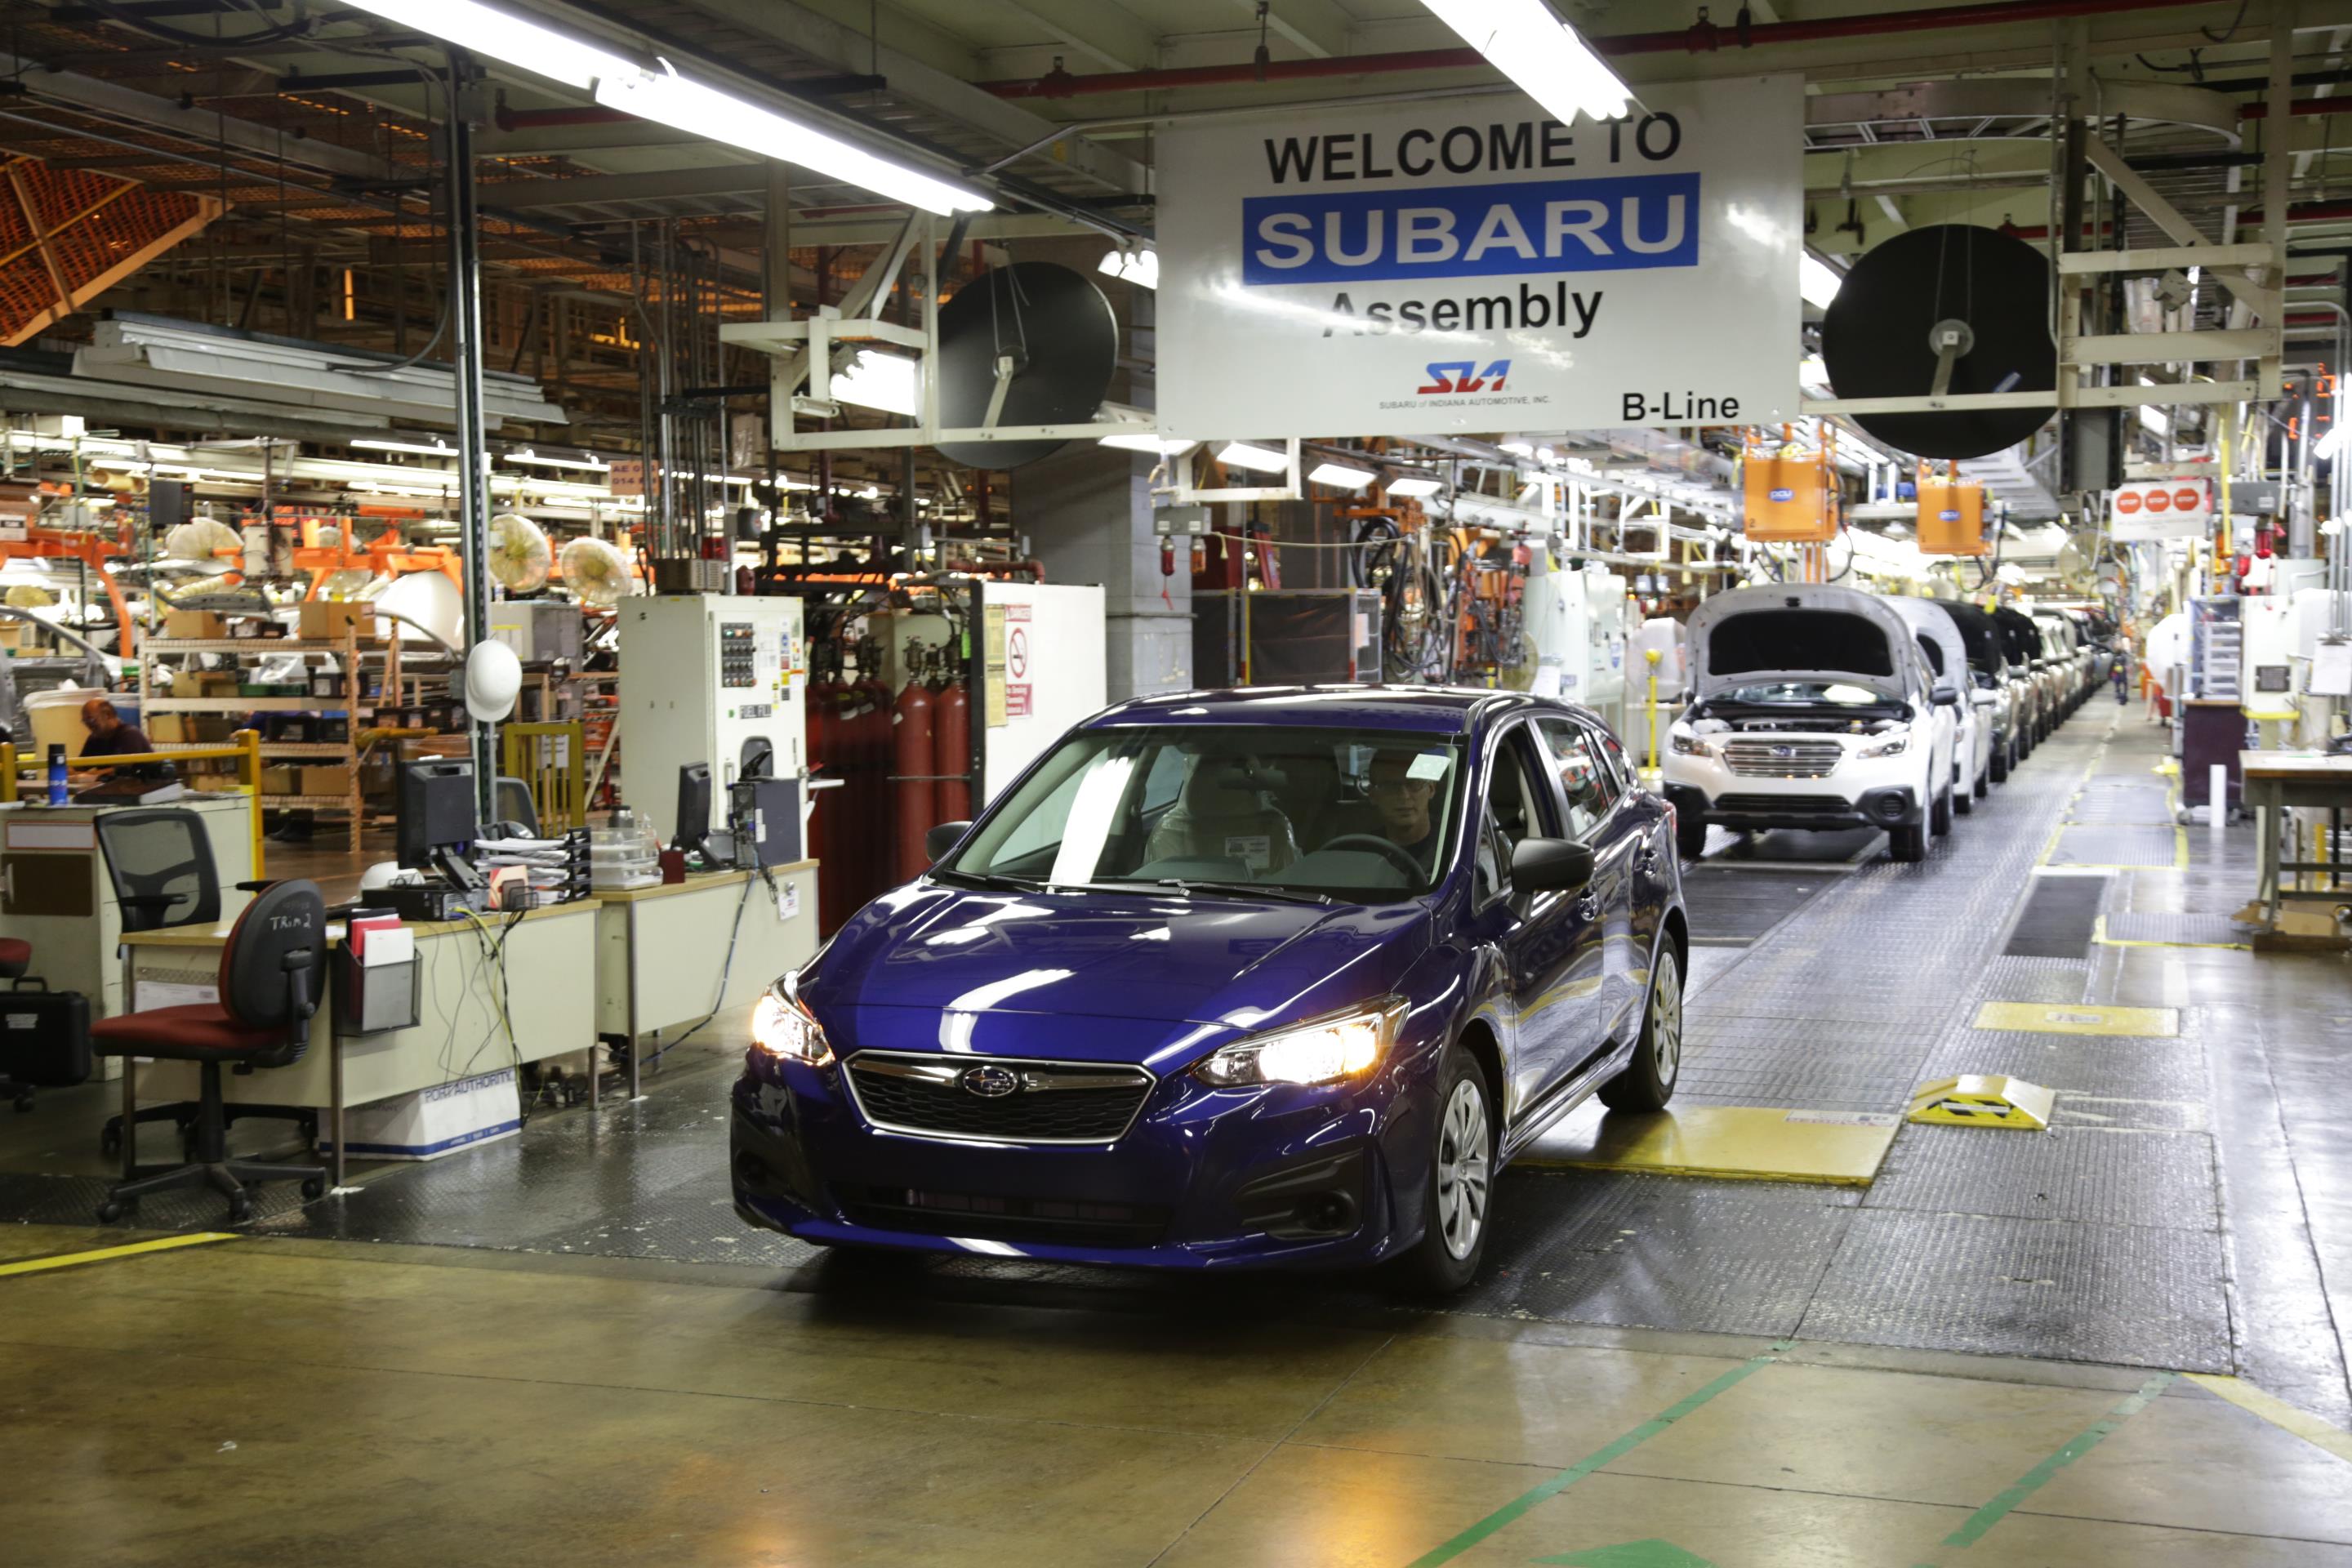 The first American-made 2017 Subaru Impreza rolls off the assembly line at Subaru of Indiana Automotive (SIA) plant in celebration event.